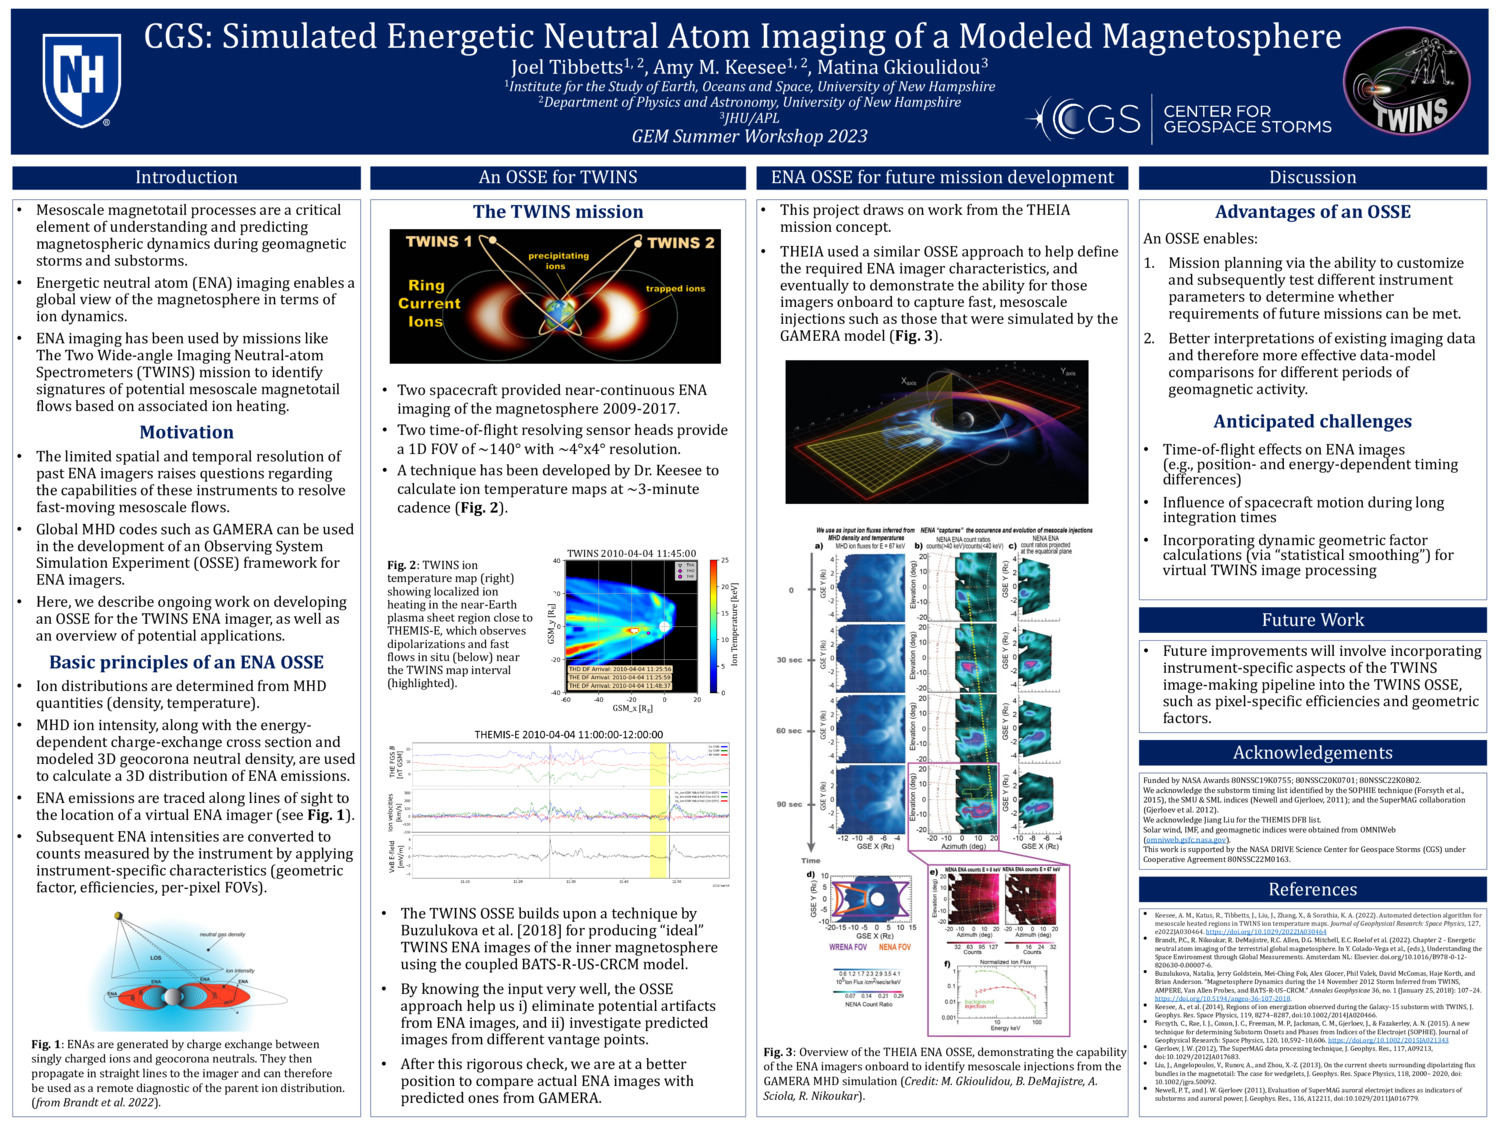 Cgs: Simulated Energetic Neutral Atom Imaging Of A Modeled Magnetosphere by jt1198